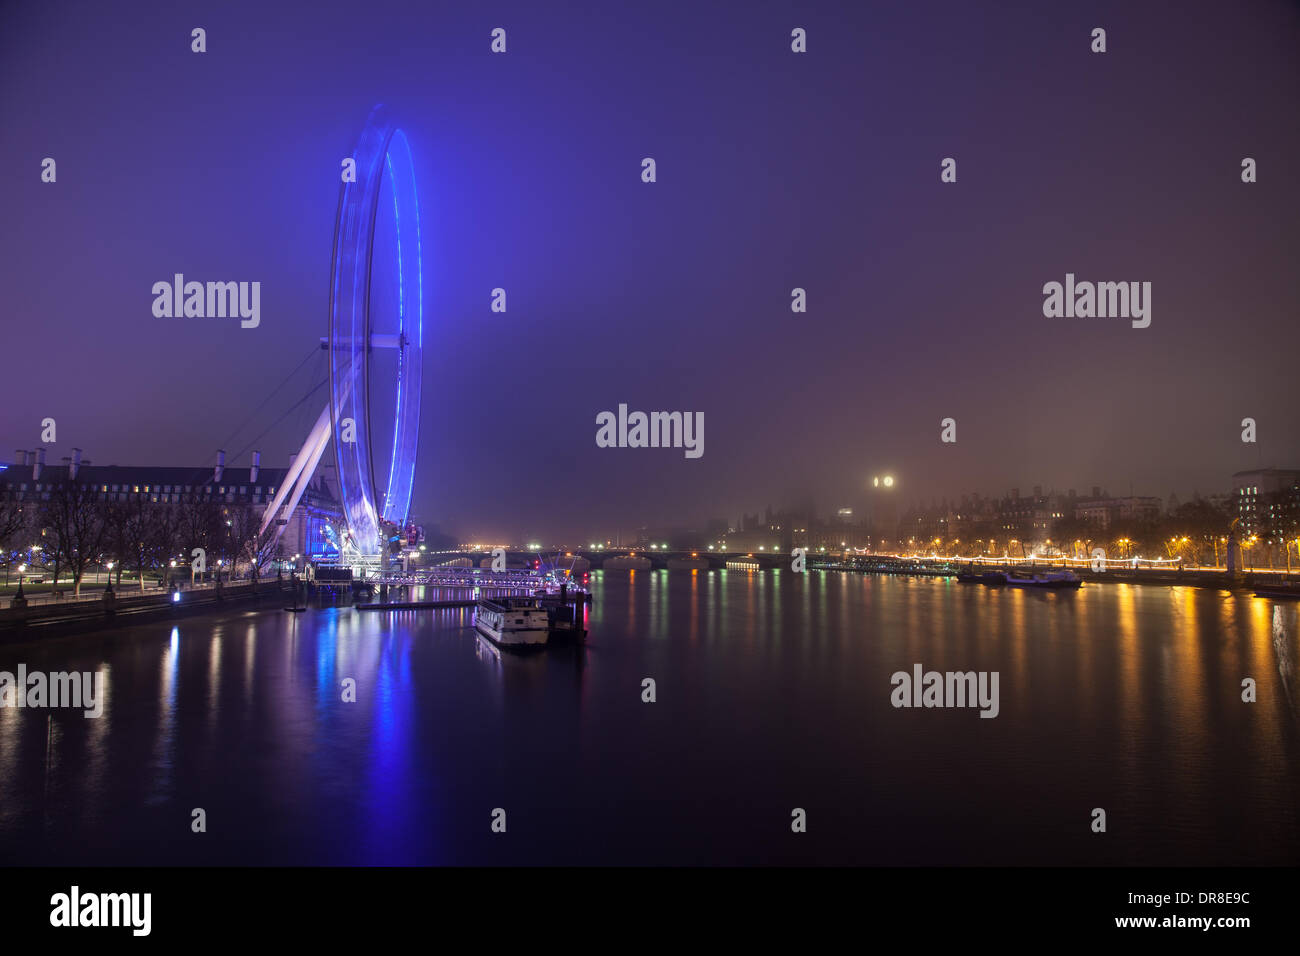 London UK, 21st Jan 2014. The blue lighting of the London Eye lights up the surrounding fog before dawn.  The London Eye is a giant Ferris wheel on the South Bank of the Thames. It was opened in 2000 and is 135m high. © Steve Bright/Alamy Live News Credit:  Steve Bright/Alamy Live News Stock Photo